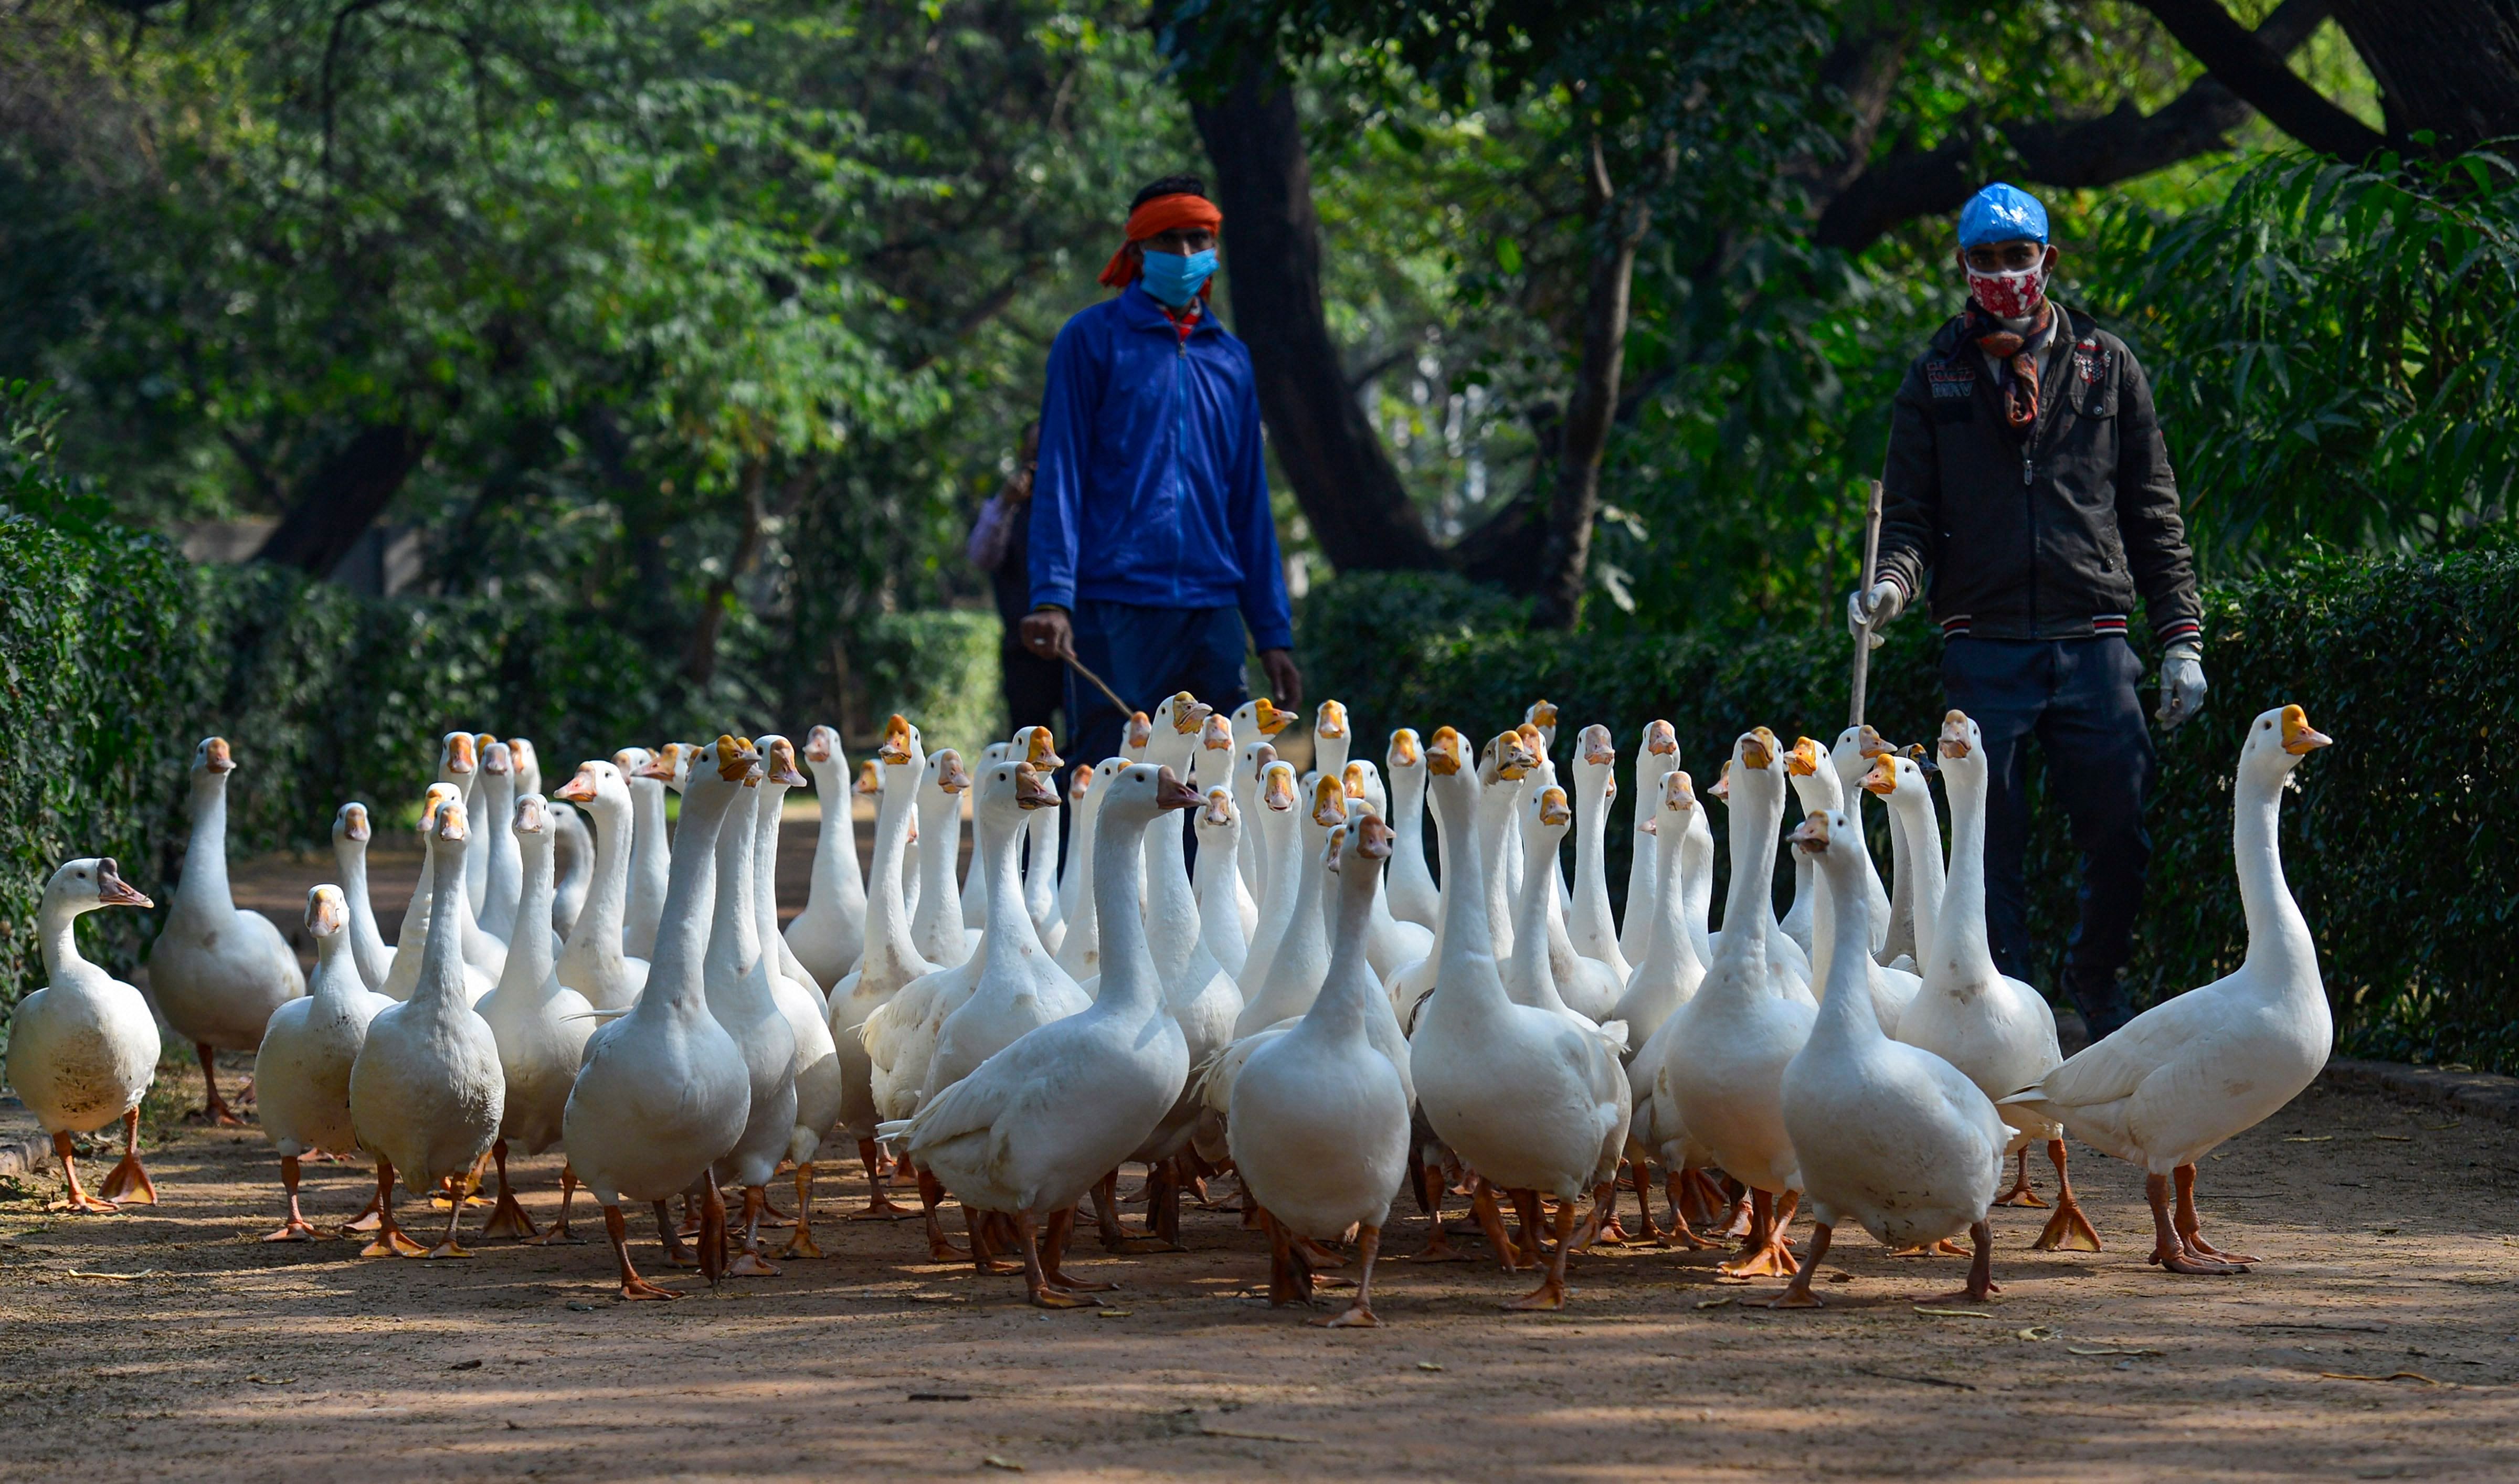 Horticulture team members gather geese for medication following reports of bird flu cases at Sanjay Lake, in New Delhi, Monday, Jan. 11, 2021. Credit: PTI Photo